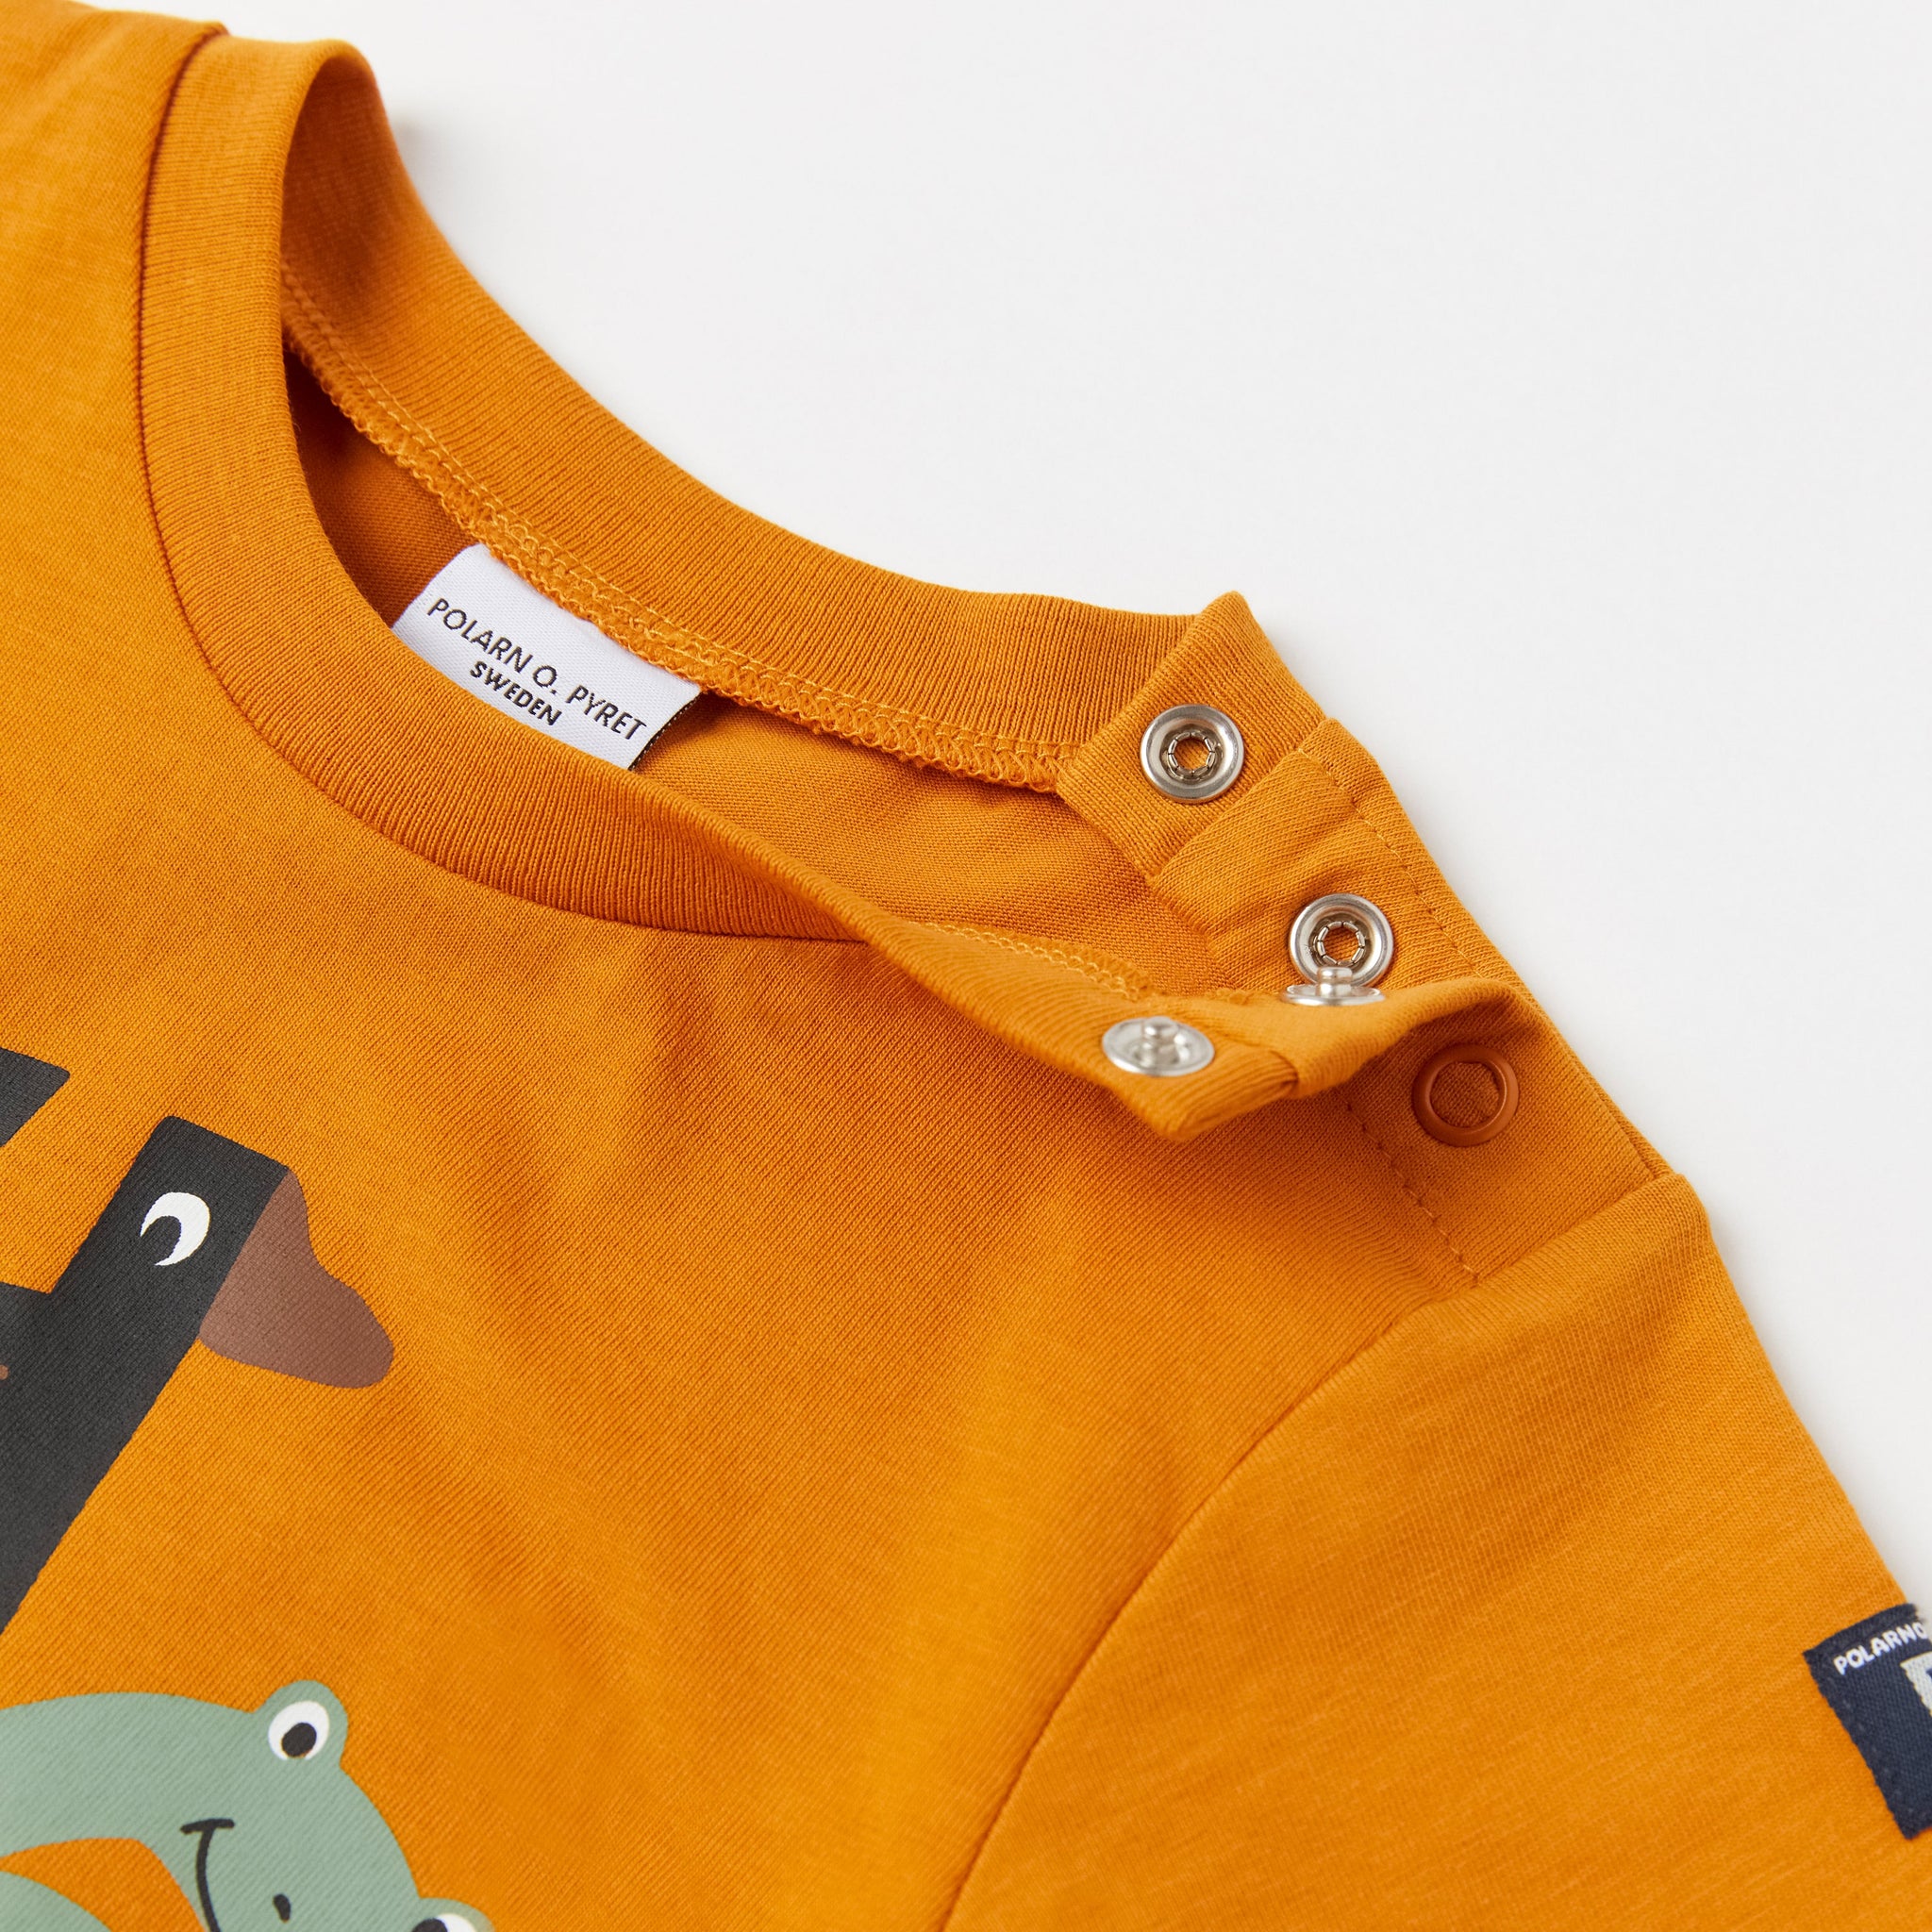 Organic Cotton Kids Orange T-Shirt from the Polarn O. Pyret Kidswear collection. Ethically produced kids clothing.